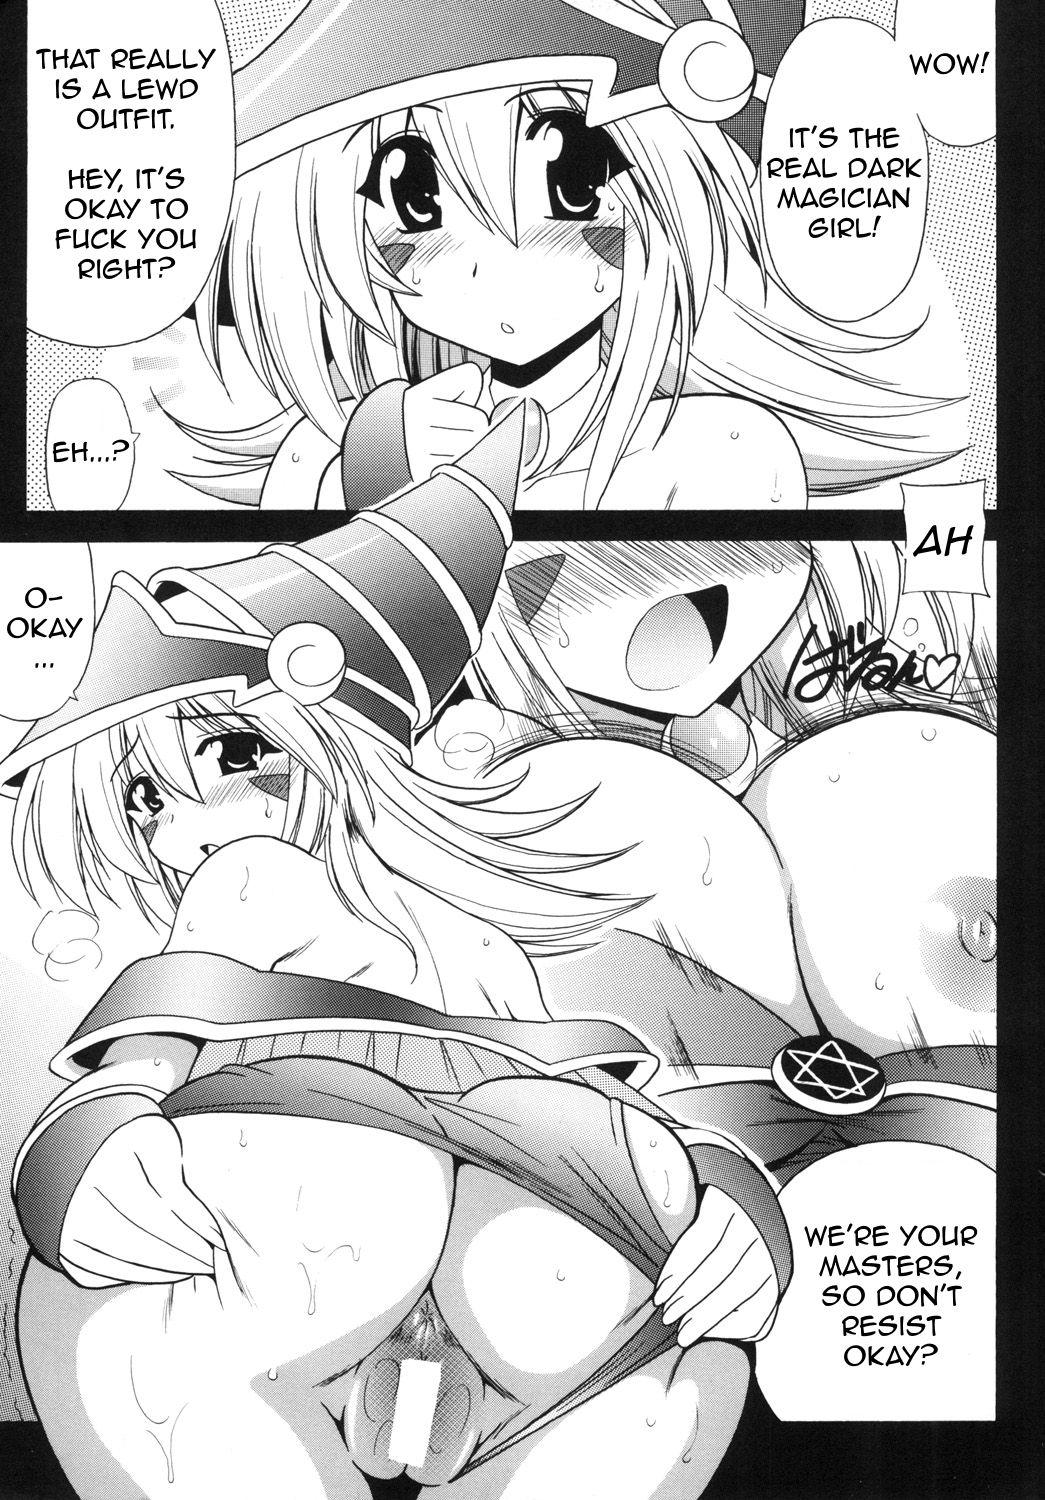 Viet BMG to Ecchi Shiyou ♡ | Let's Have Sex with Dark Magician Girl ♡ - Yu-gi-oh Pattaya - Page 3